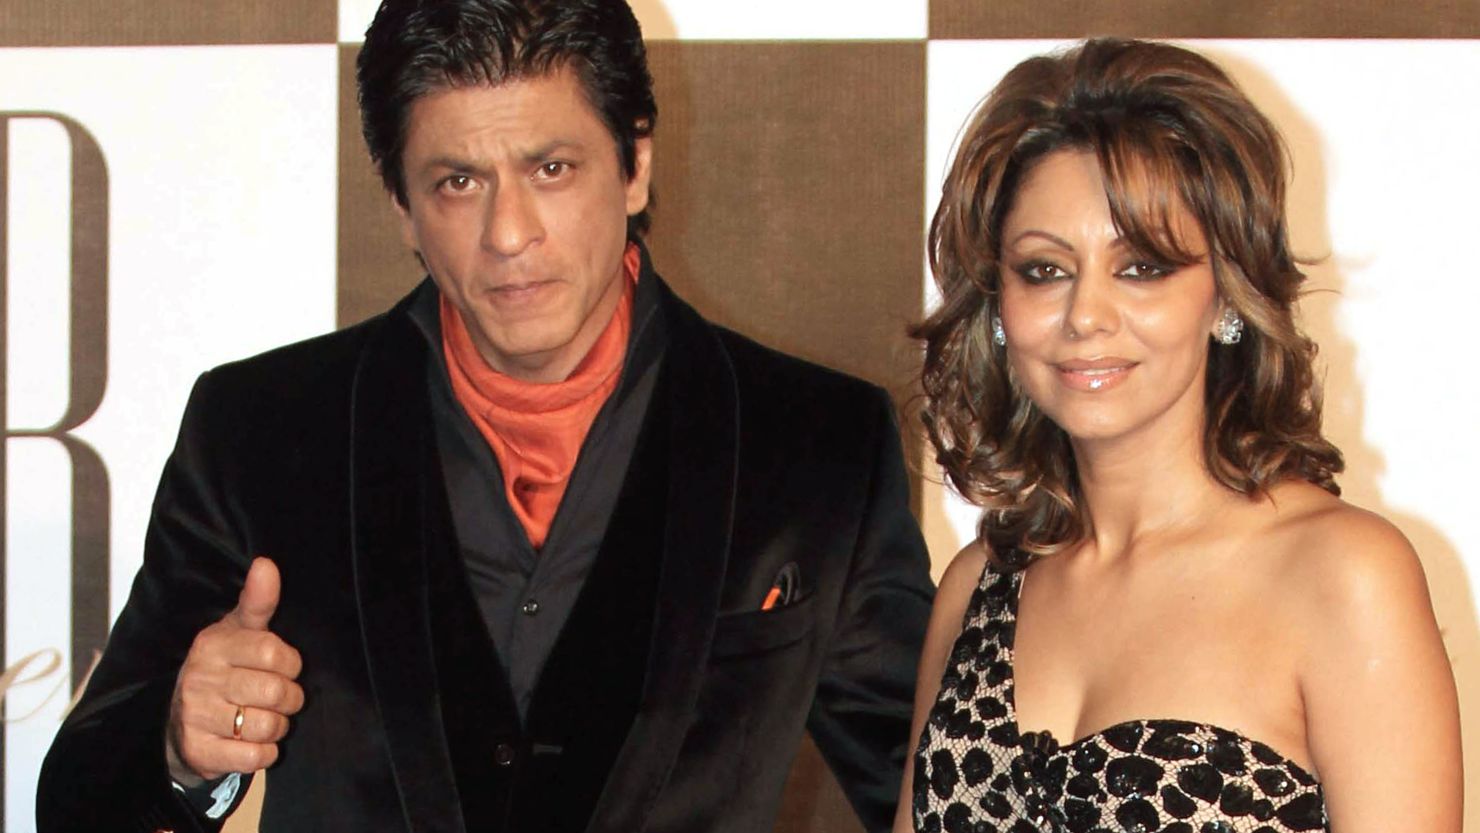 Indian Bollywood actor Shah Rukh Khan (left) poses with his wife Gauri.